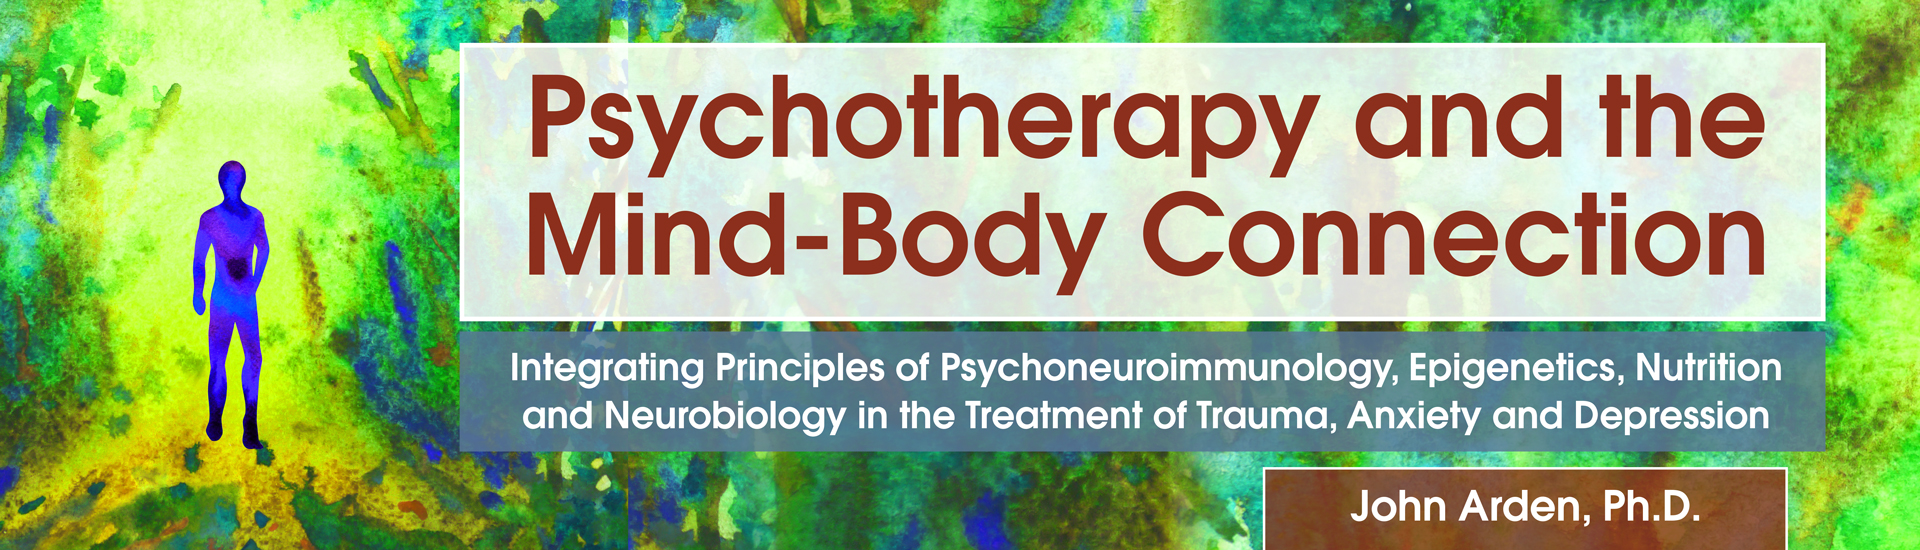 Psychotherapy and the Mind-Body Connection